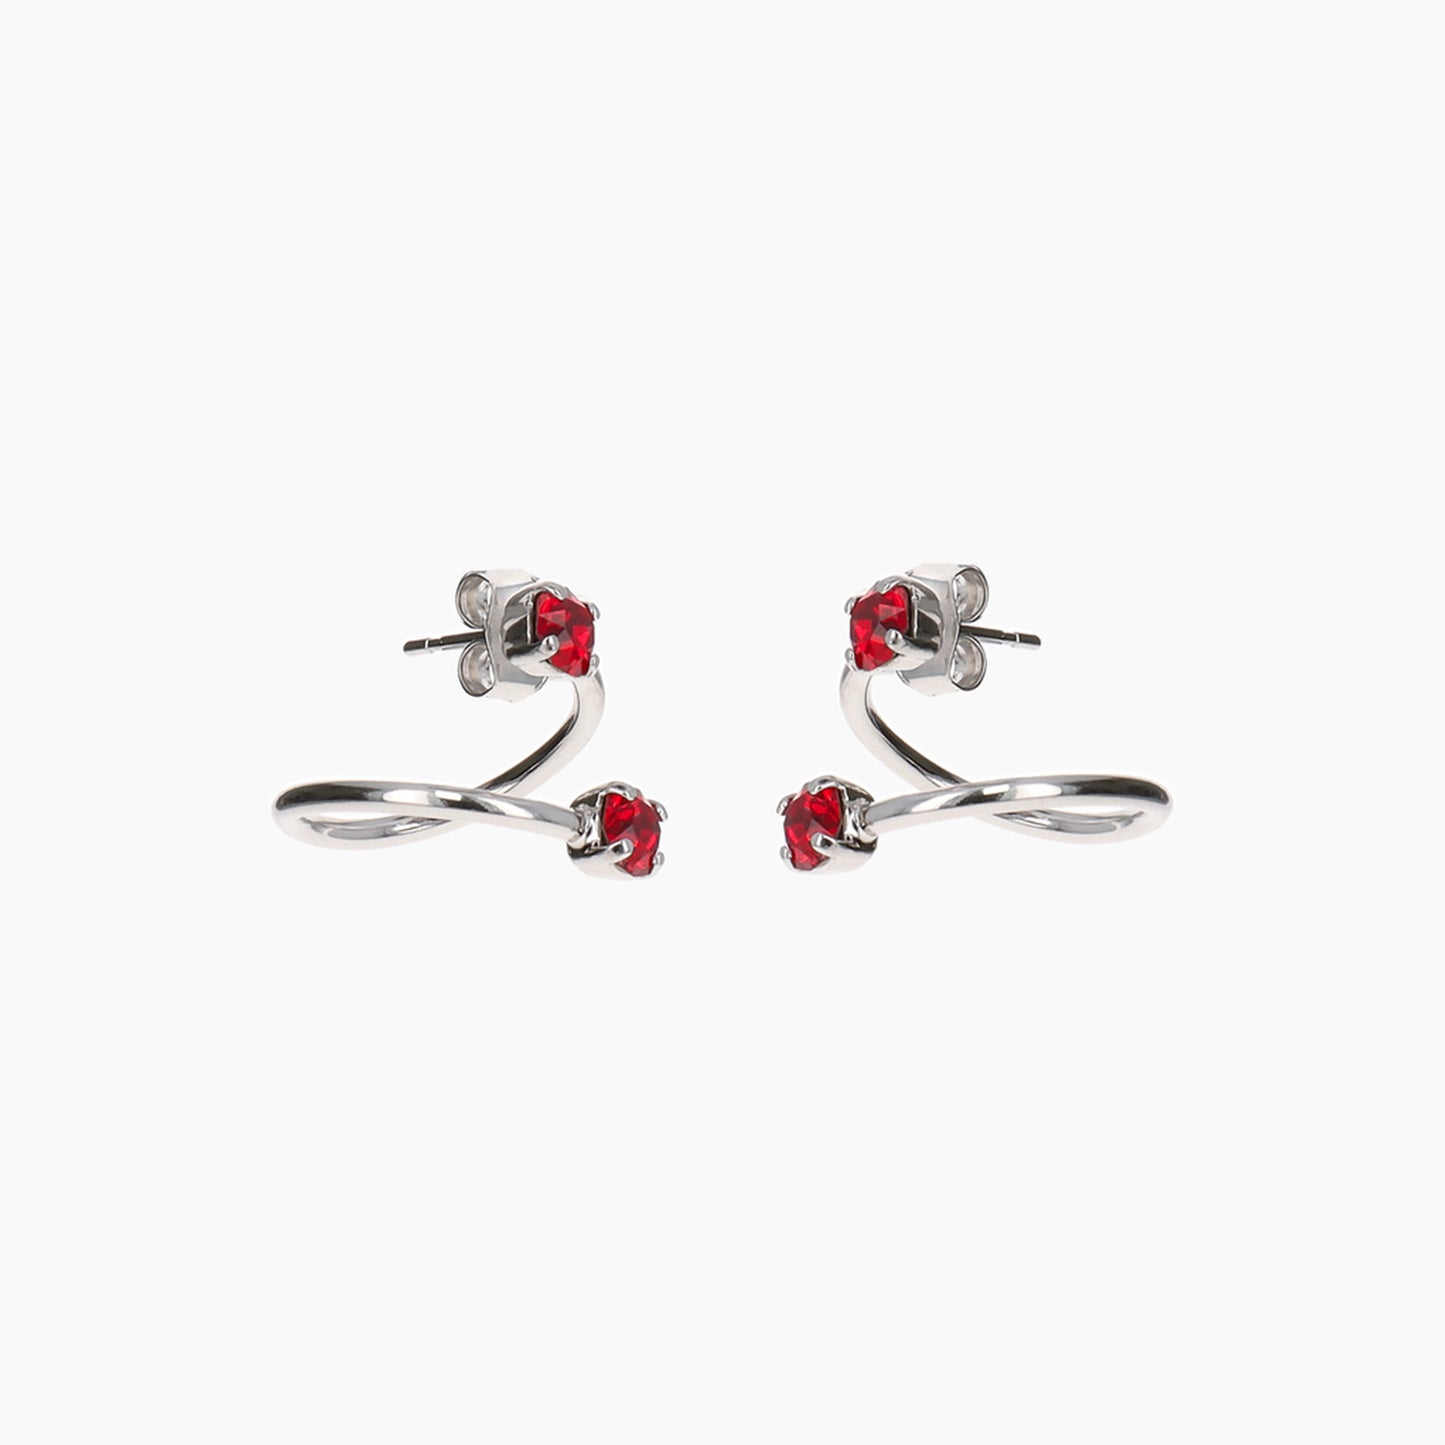 Justine Clenquet Maxine Earrings, Red